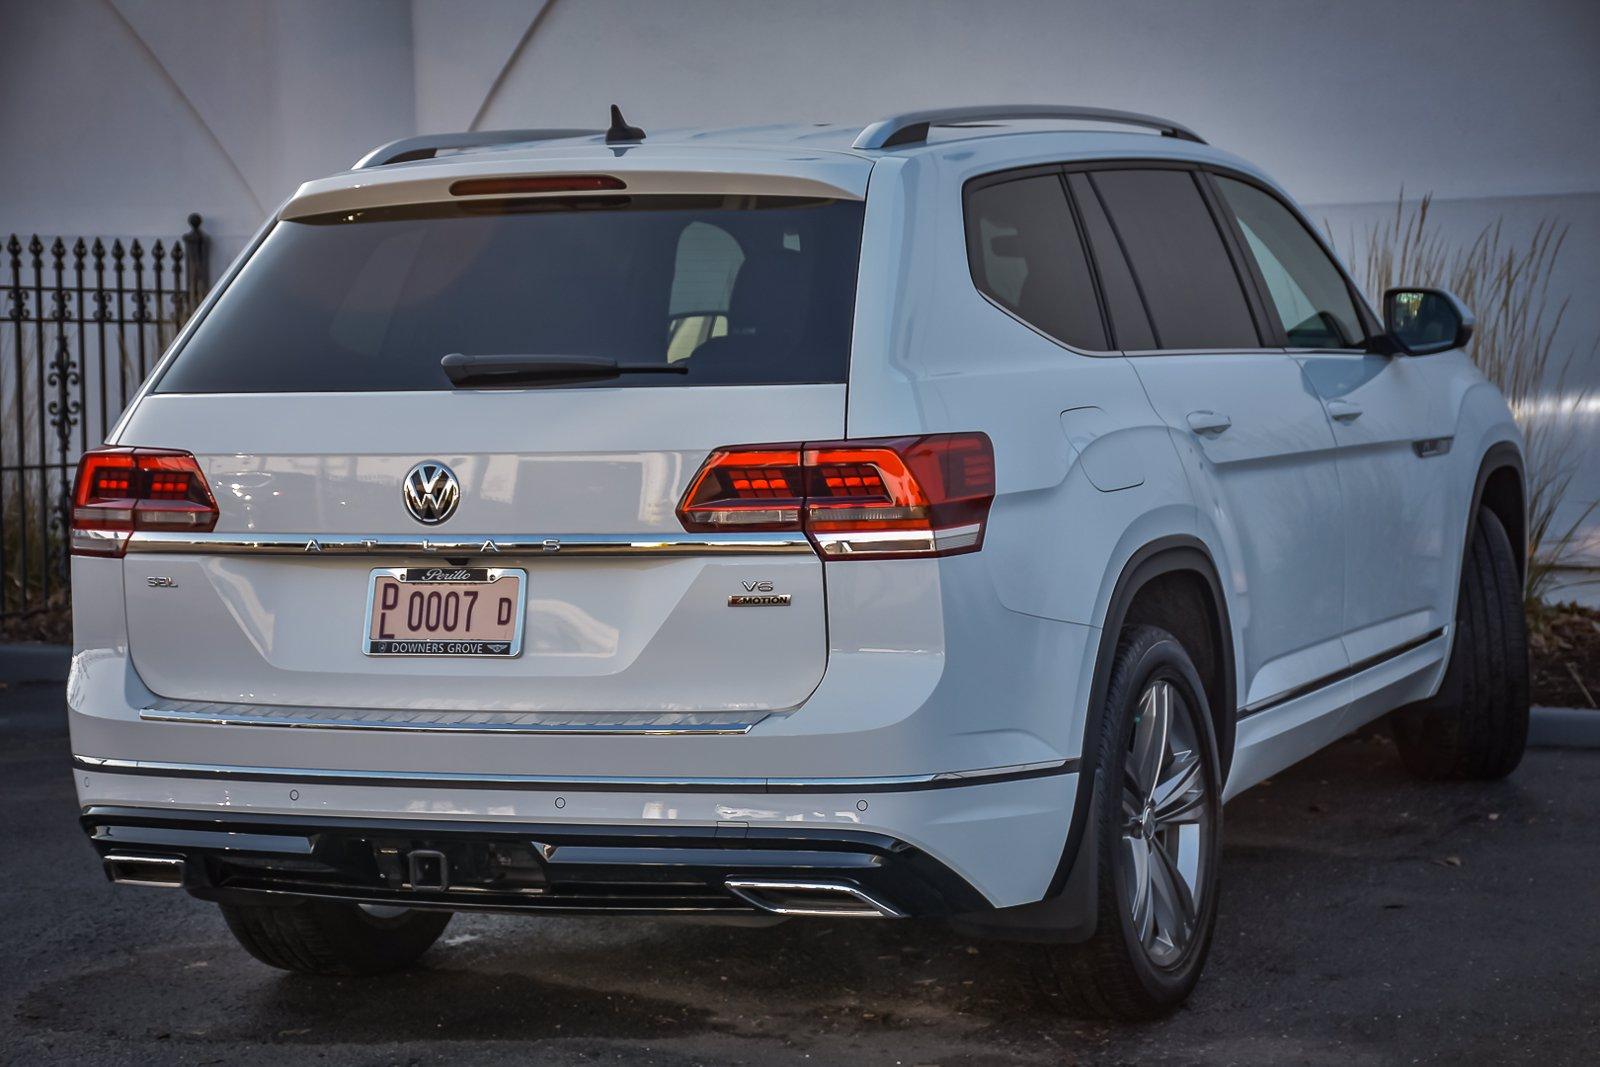 Used 2019 Volkswagen Atlas 3.6L V6 SEL R-Line, 3rd Row, | Downers Grove, IL